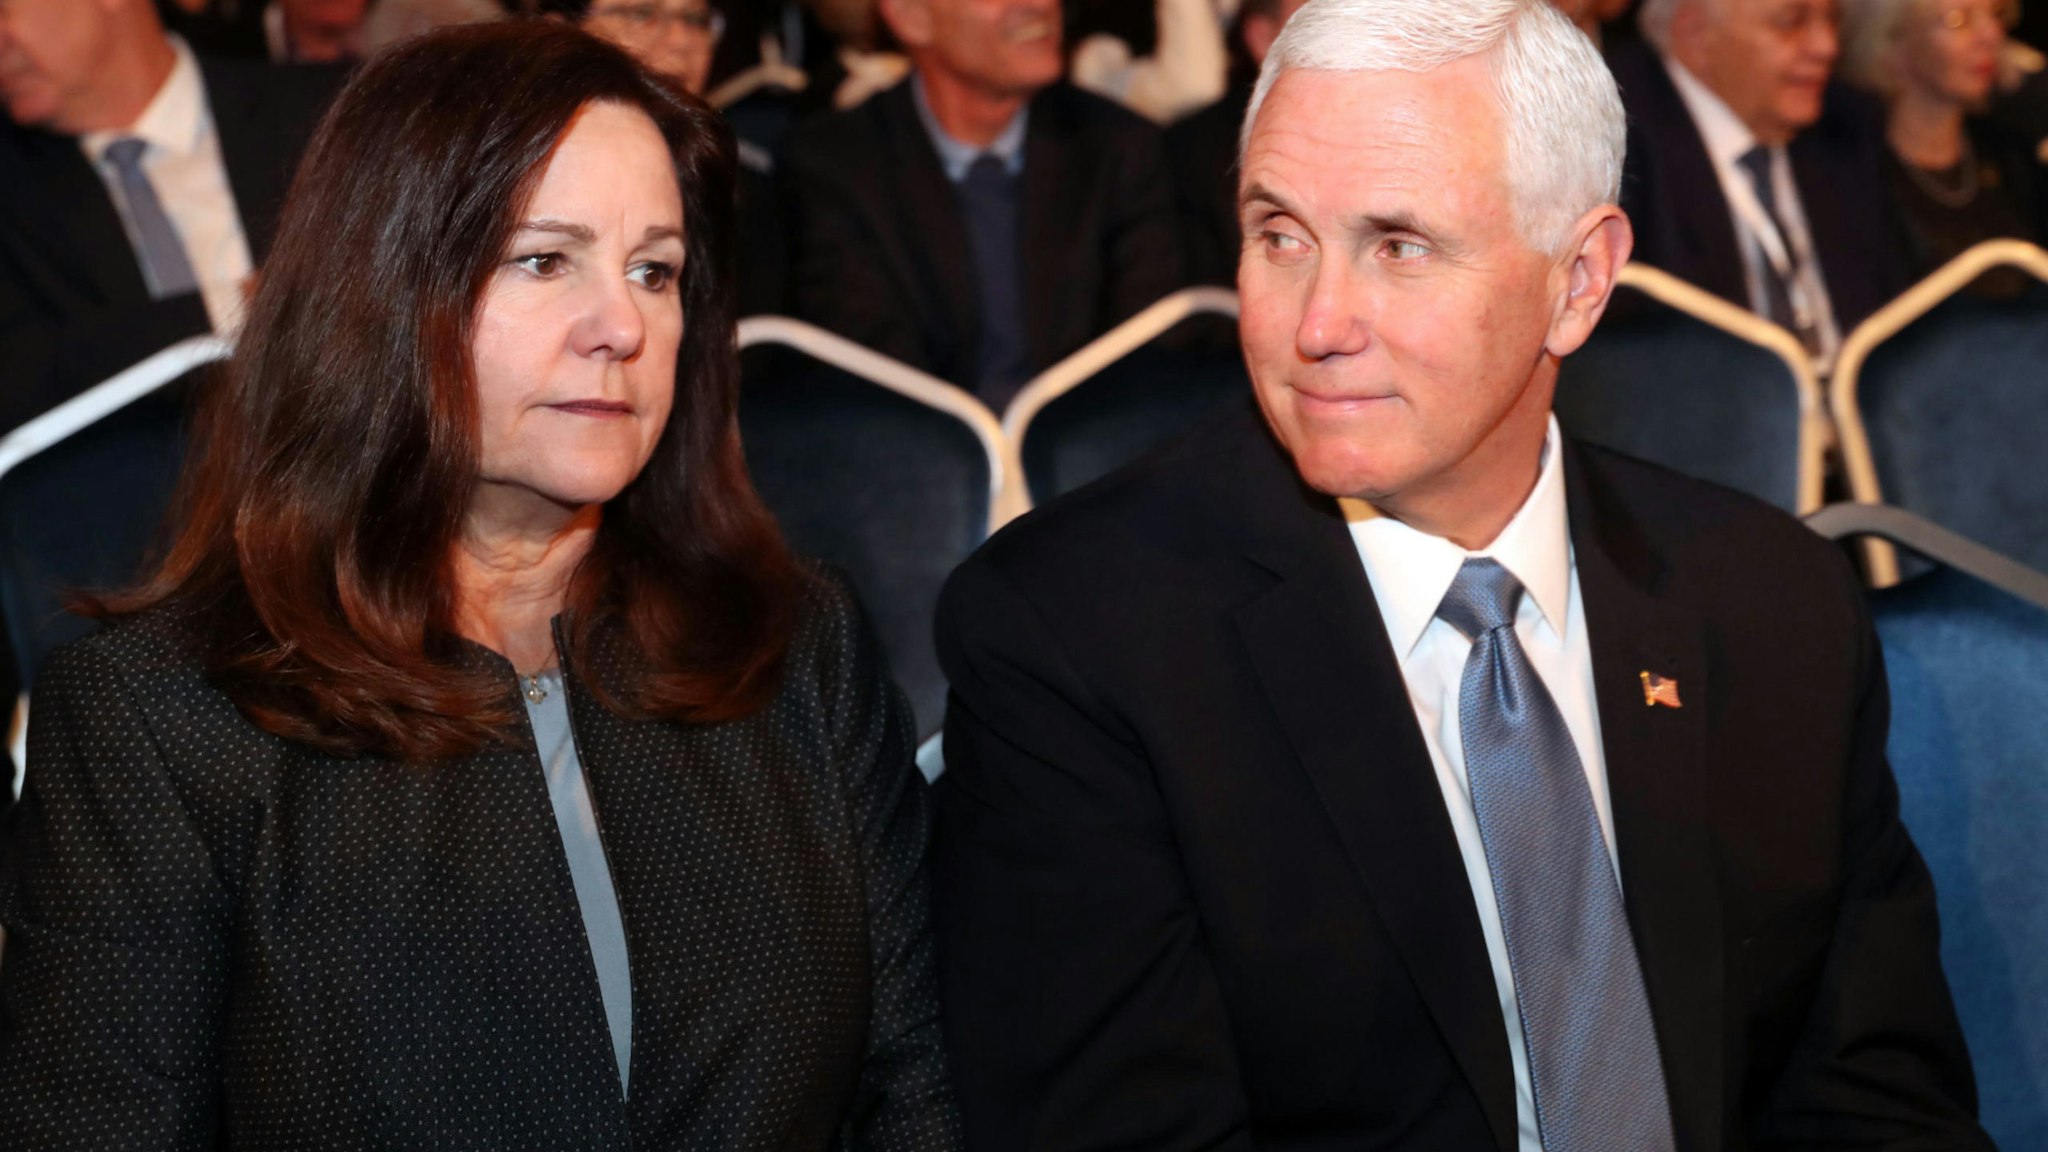 JERUSALEM, ISRAEL - JANUARY 23: Vice President of the United States Mike Pence (R) and his wife Karen Pence (L) during the Fifth World Holocaust Forum on January 23, 2020 in Jerusalem, Israel. Heads of State gathering in Jerusalem to mark 75 years since the liberation of Auschwitz will be the “largest diplomatic event in Israel’s history,” according to the country's Foreign Minister. (Photo by Yad Vashem - Pool/Getty Images)